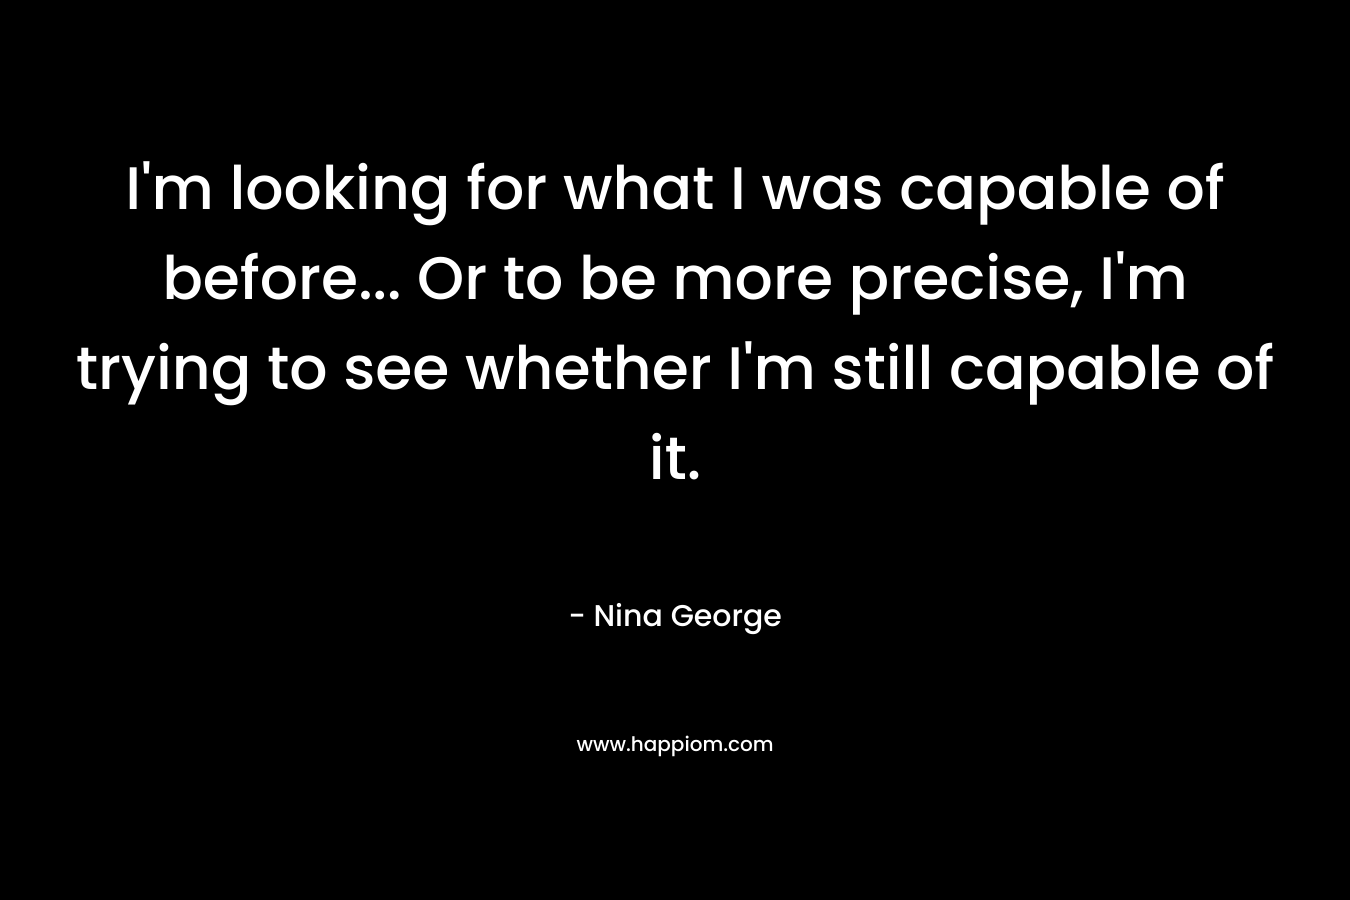 I'm looking for what I was capable of before... Or to be more precise, I'm trying to see whether I'm still capable of it.